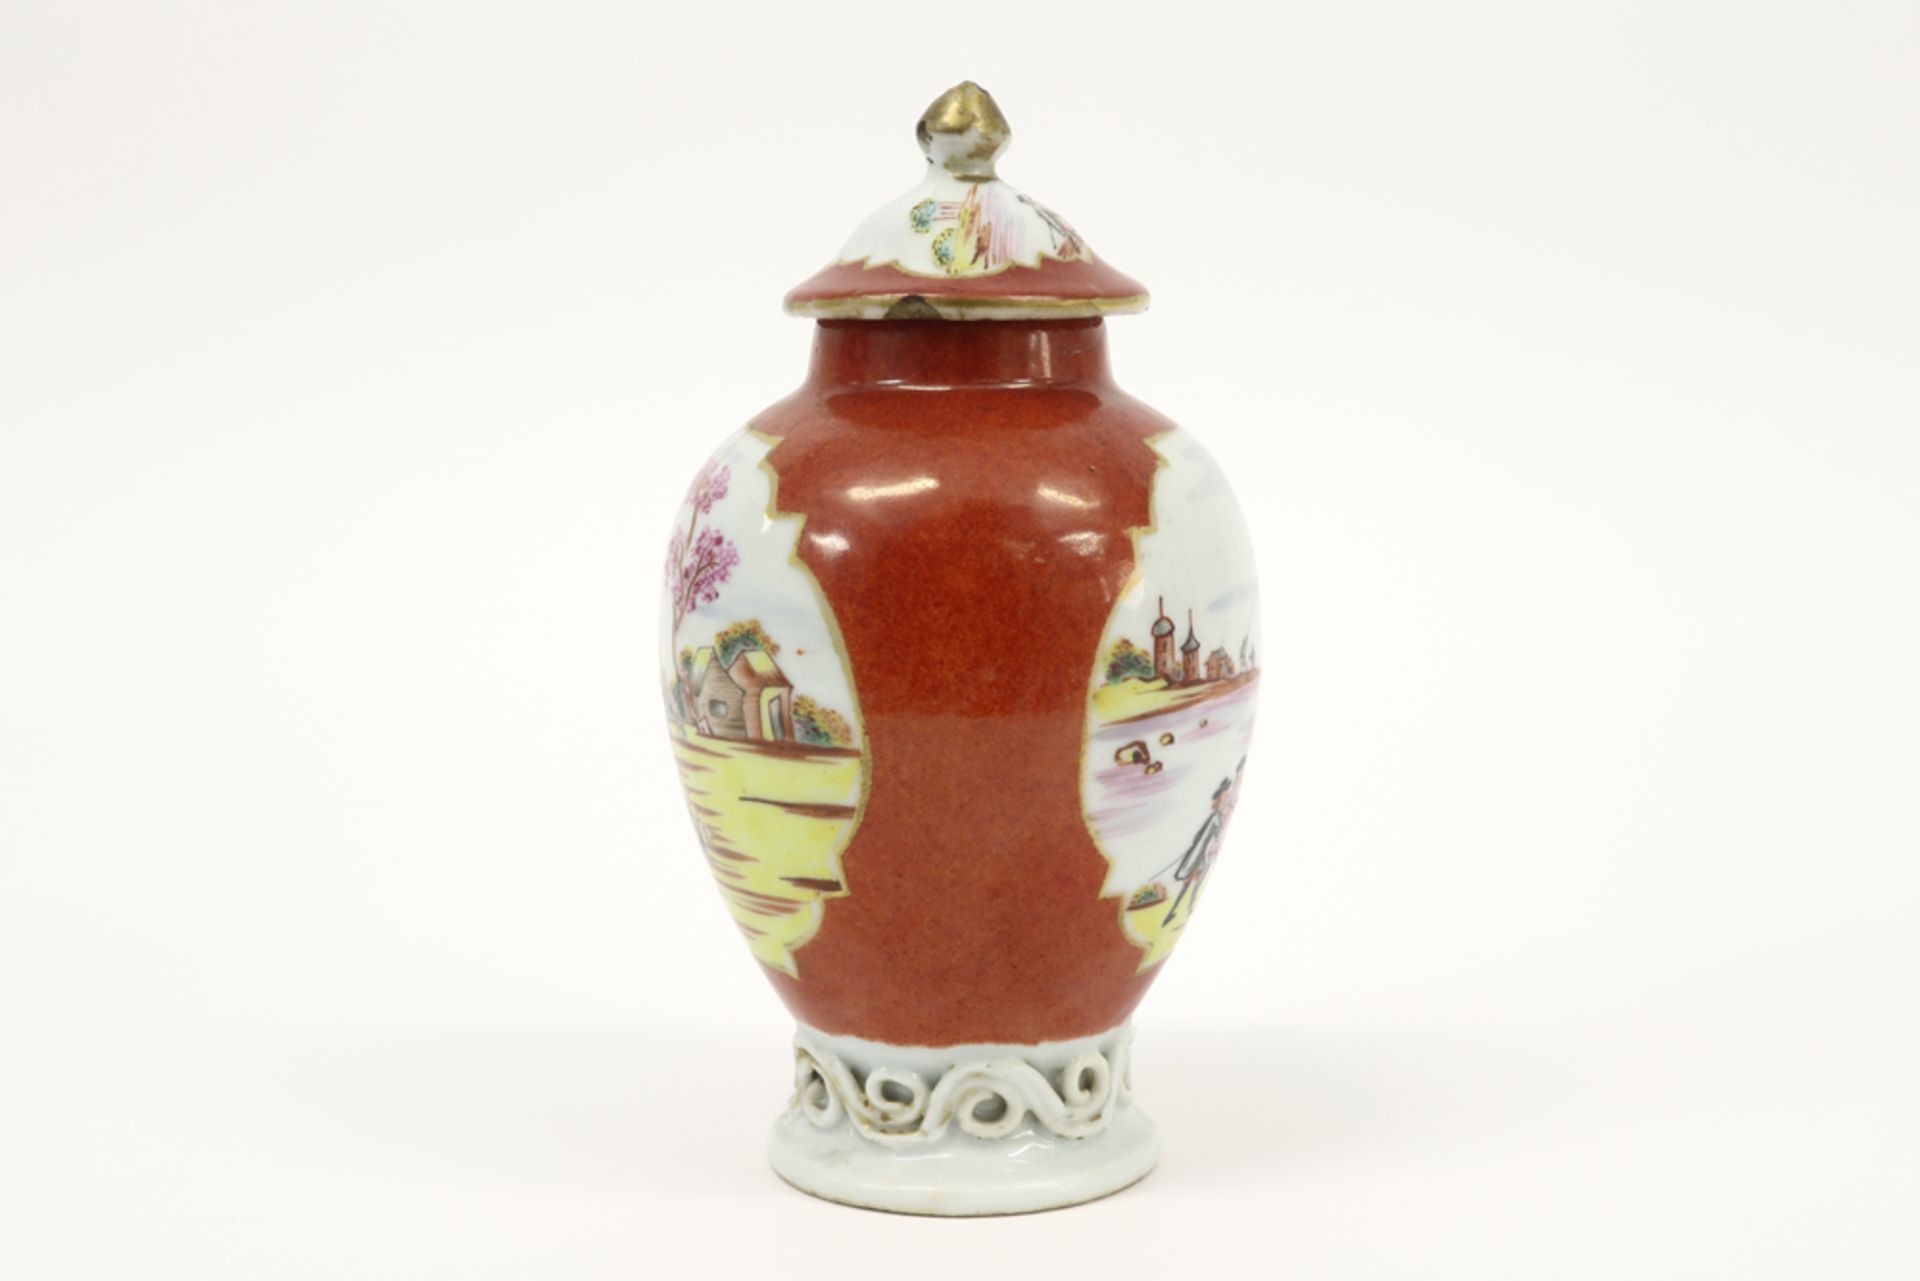 18th Cent. Chinese lidded teacaddy in porcelain with a polychrome European decor with figures in a - Image 2 of 5